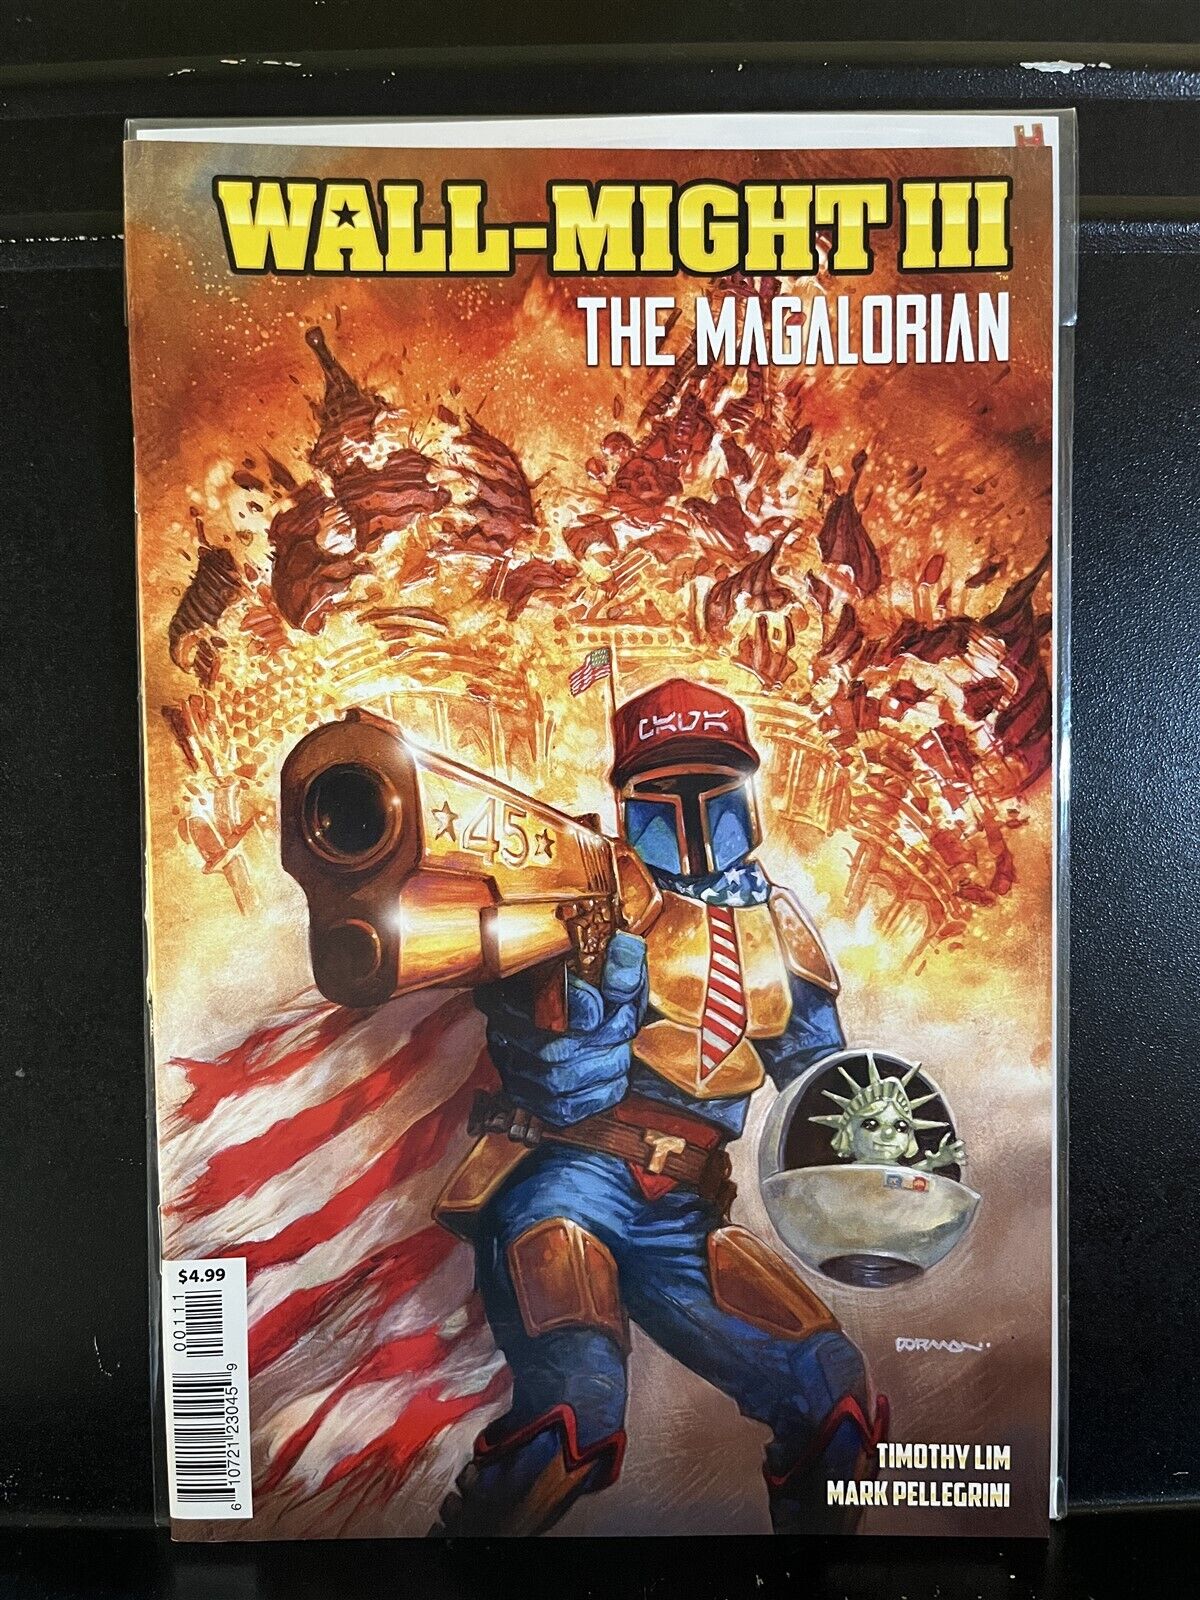 Wall-Might III The Magalorian #1 (2020 Antarctic Press) We Combine Shipping